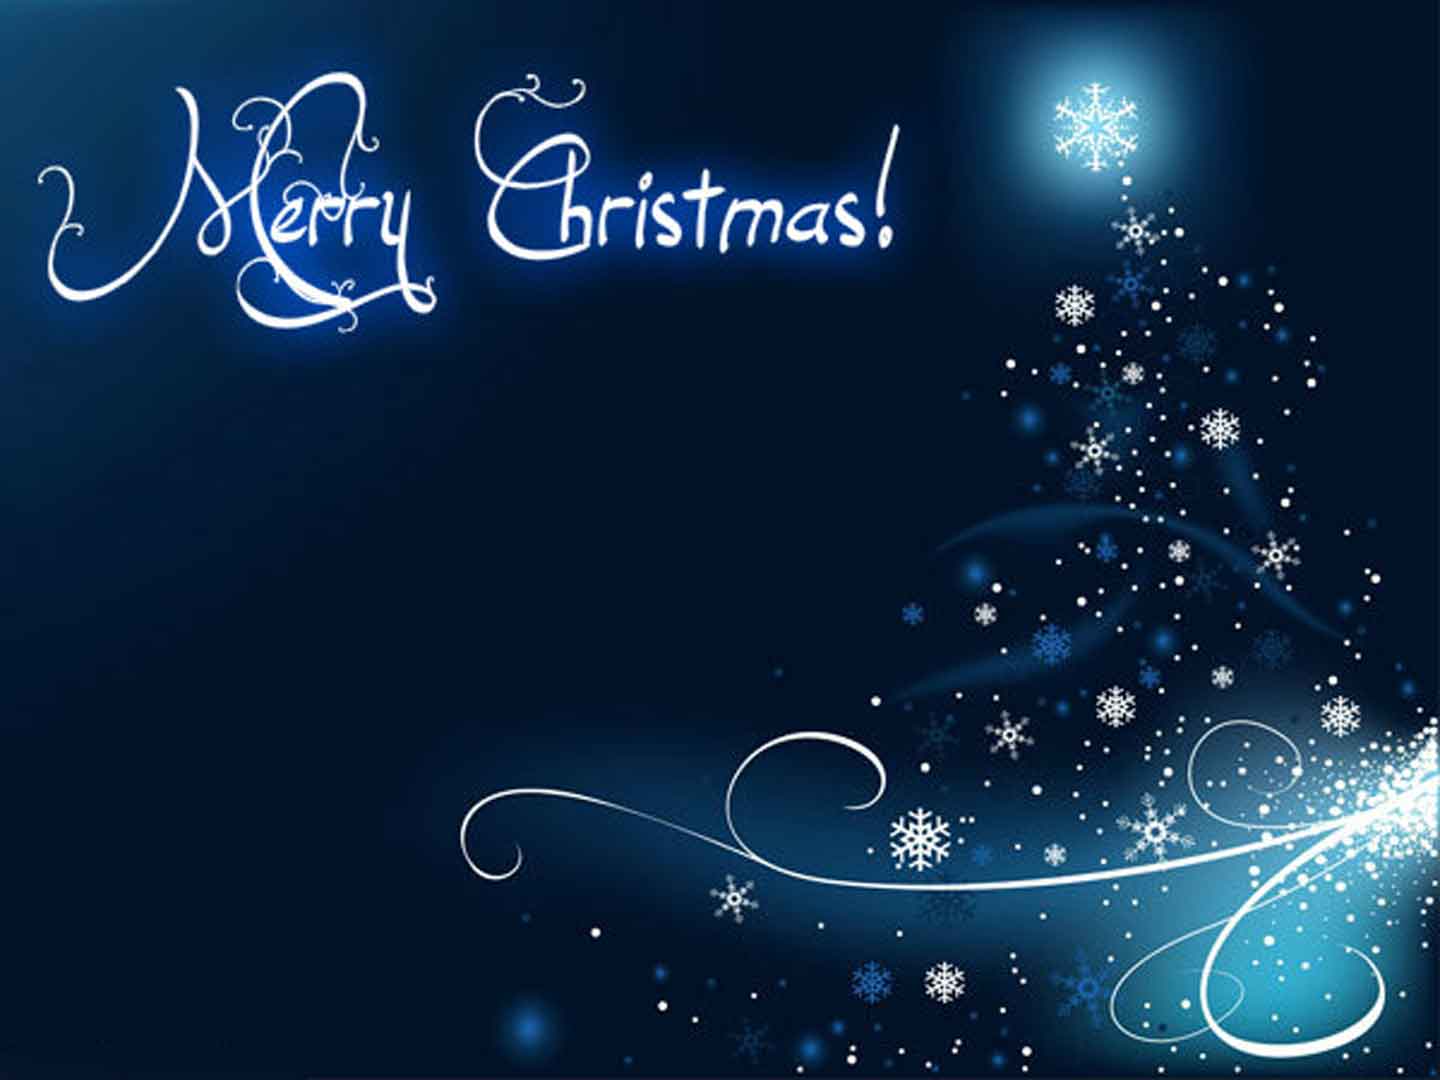 Merry Christmas Wallpaper. Merry Christmas Picture